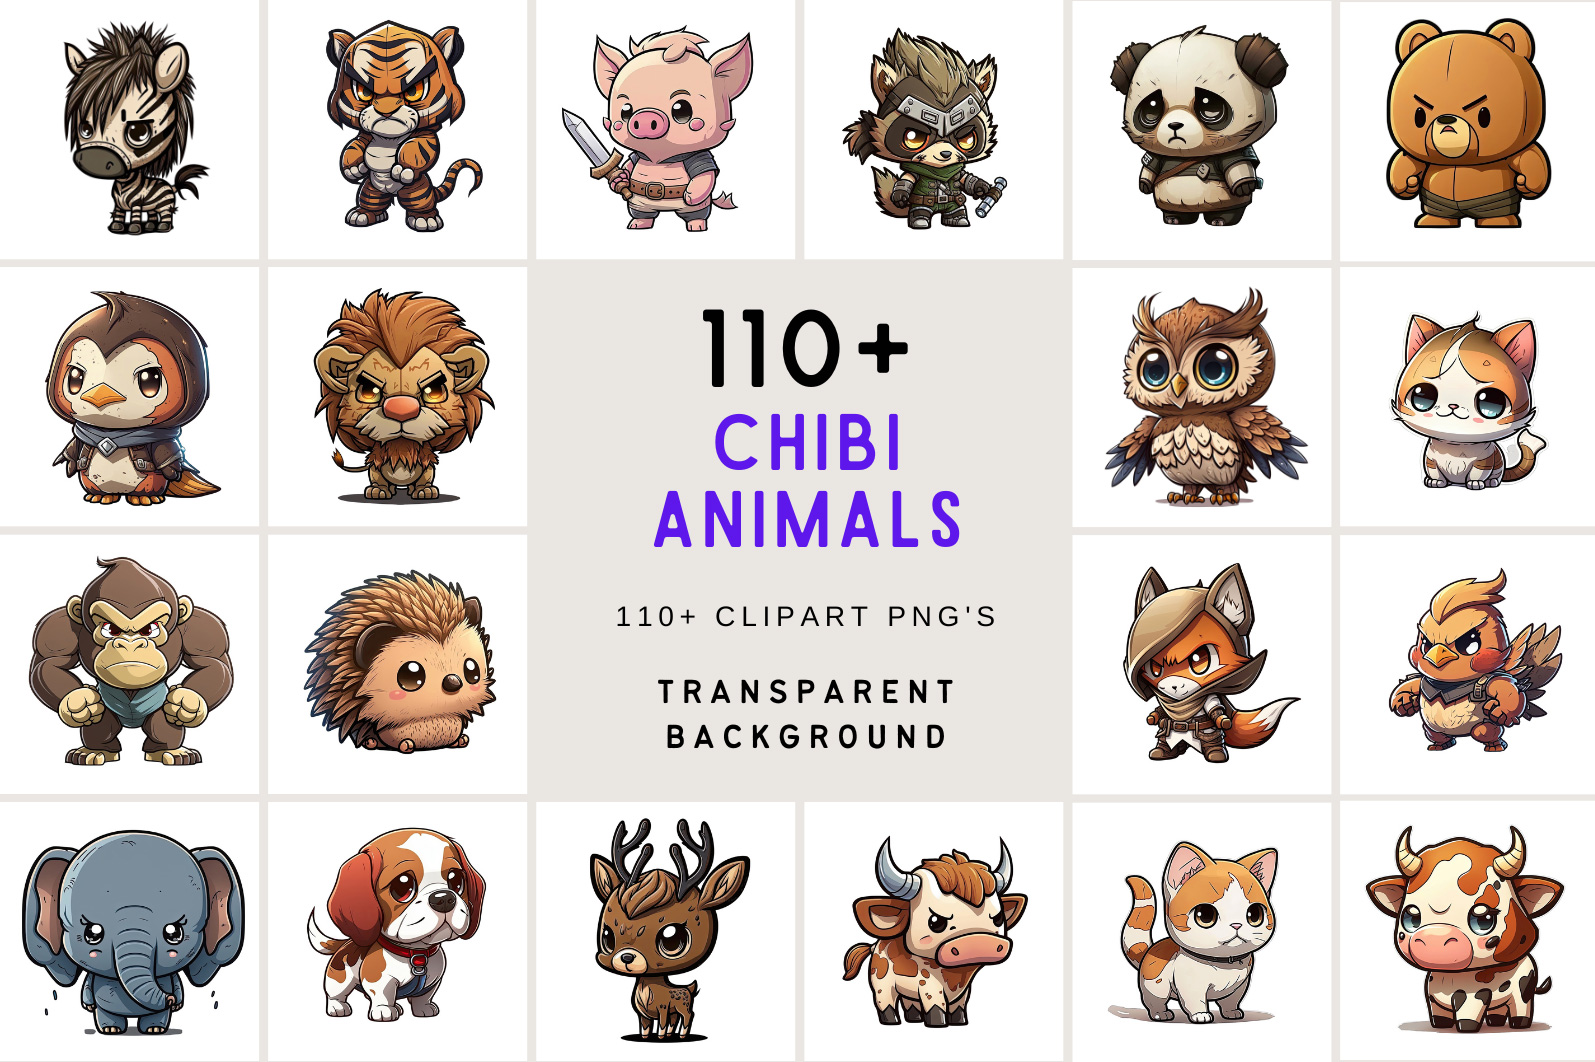 117 Adorable Chibi Animal Clipart Illustrations with Transparent Backgrounds 